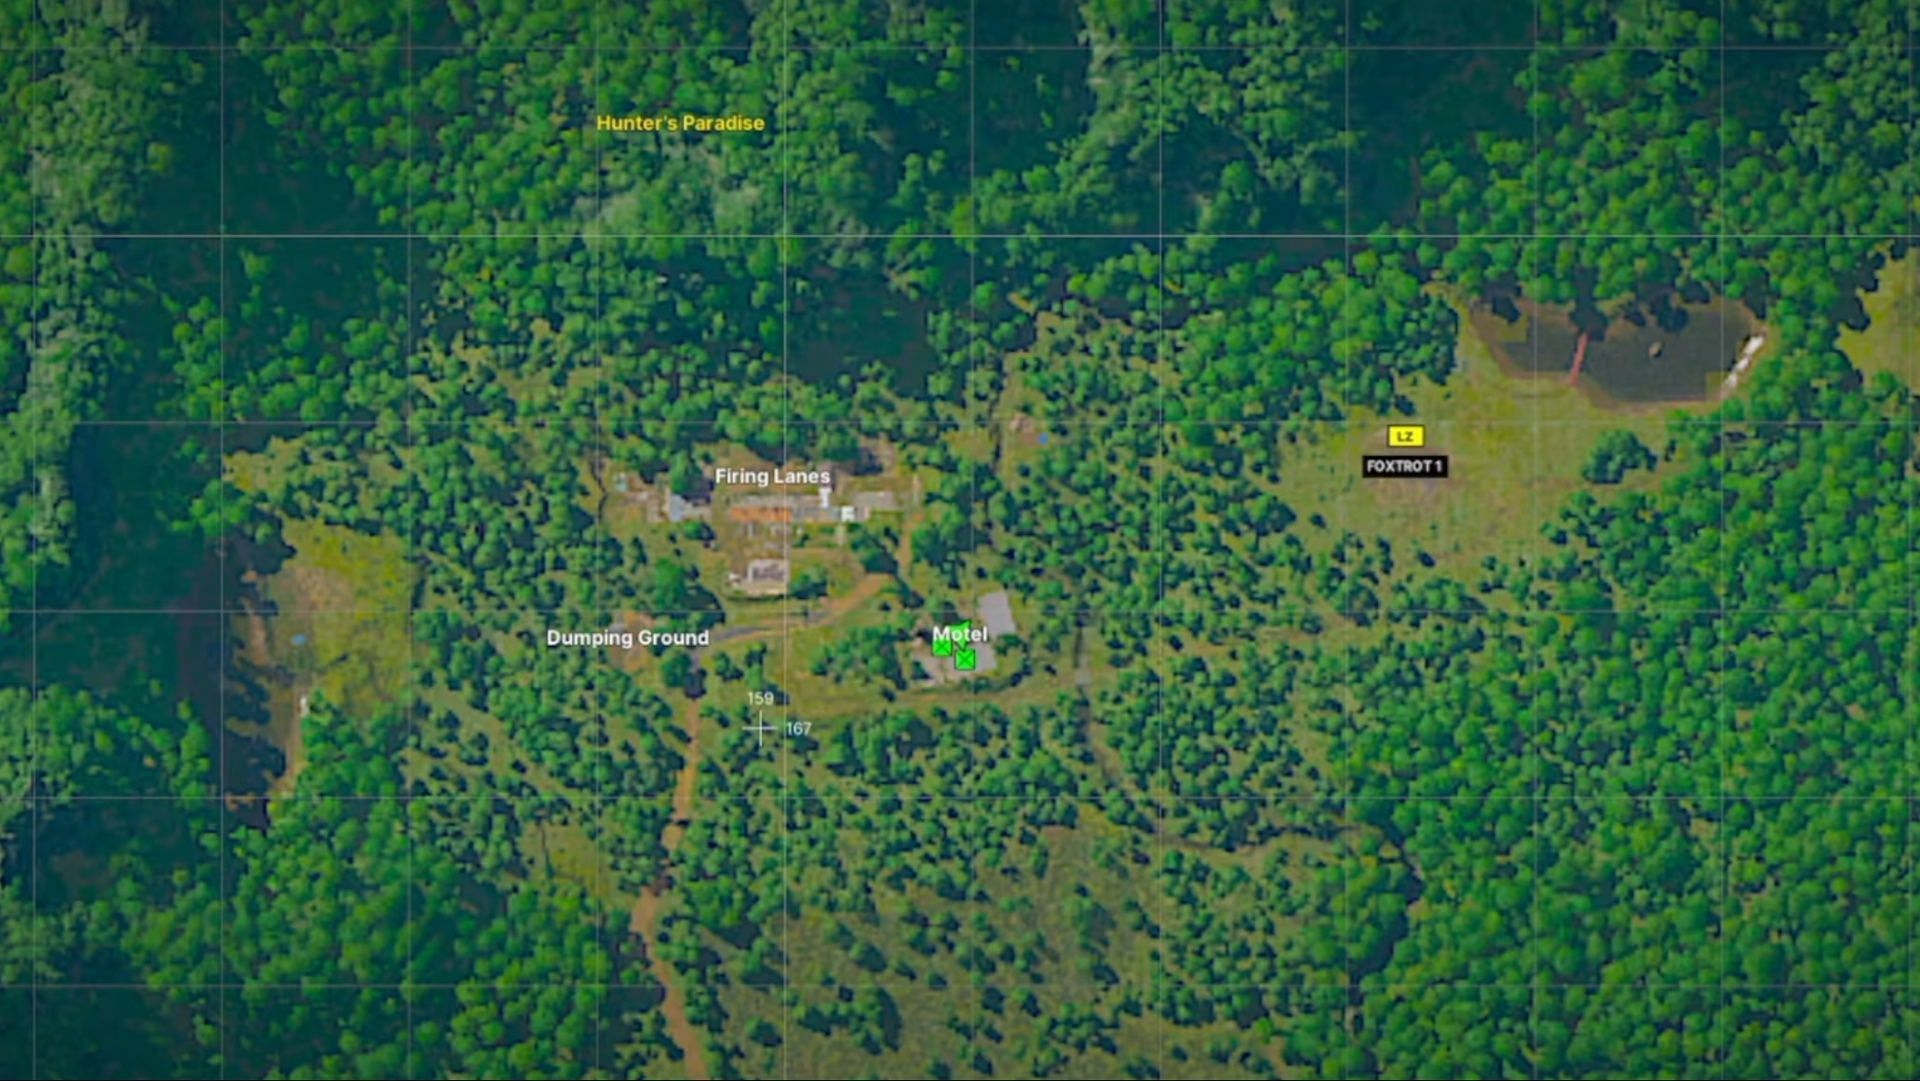 Location of the Motel (Image via MADFINGER Games || YouTube/OneShotRich)